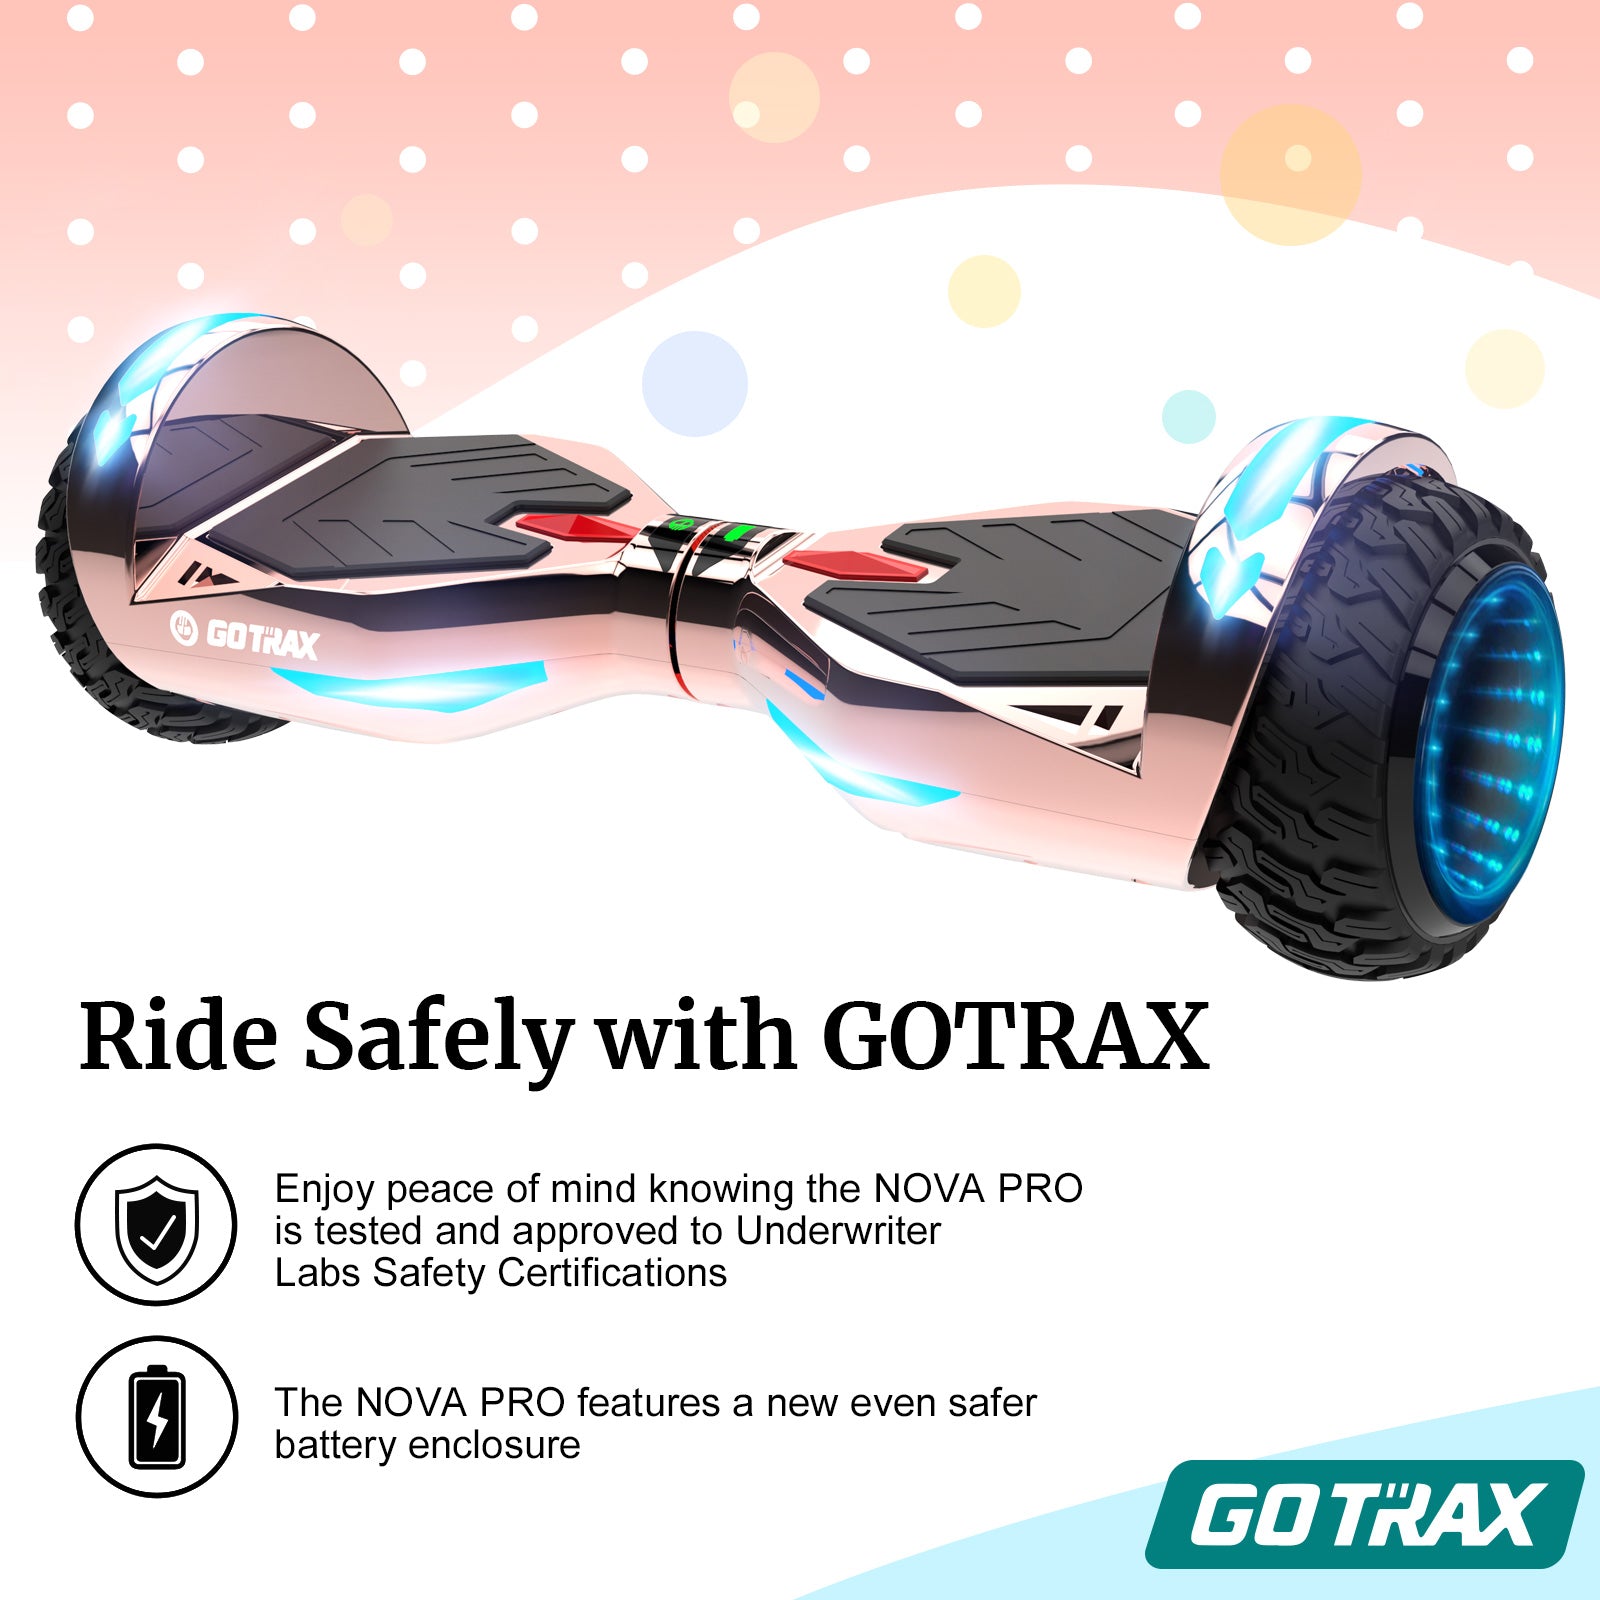 Gotrax Nova Pro All-terrain Hoverboard with Speakers and Flash Light 8.5"-Max 8KM Range & 10KPH Max Speed